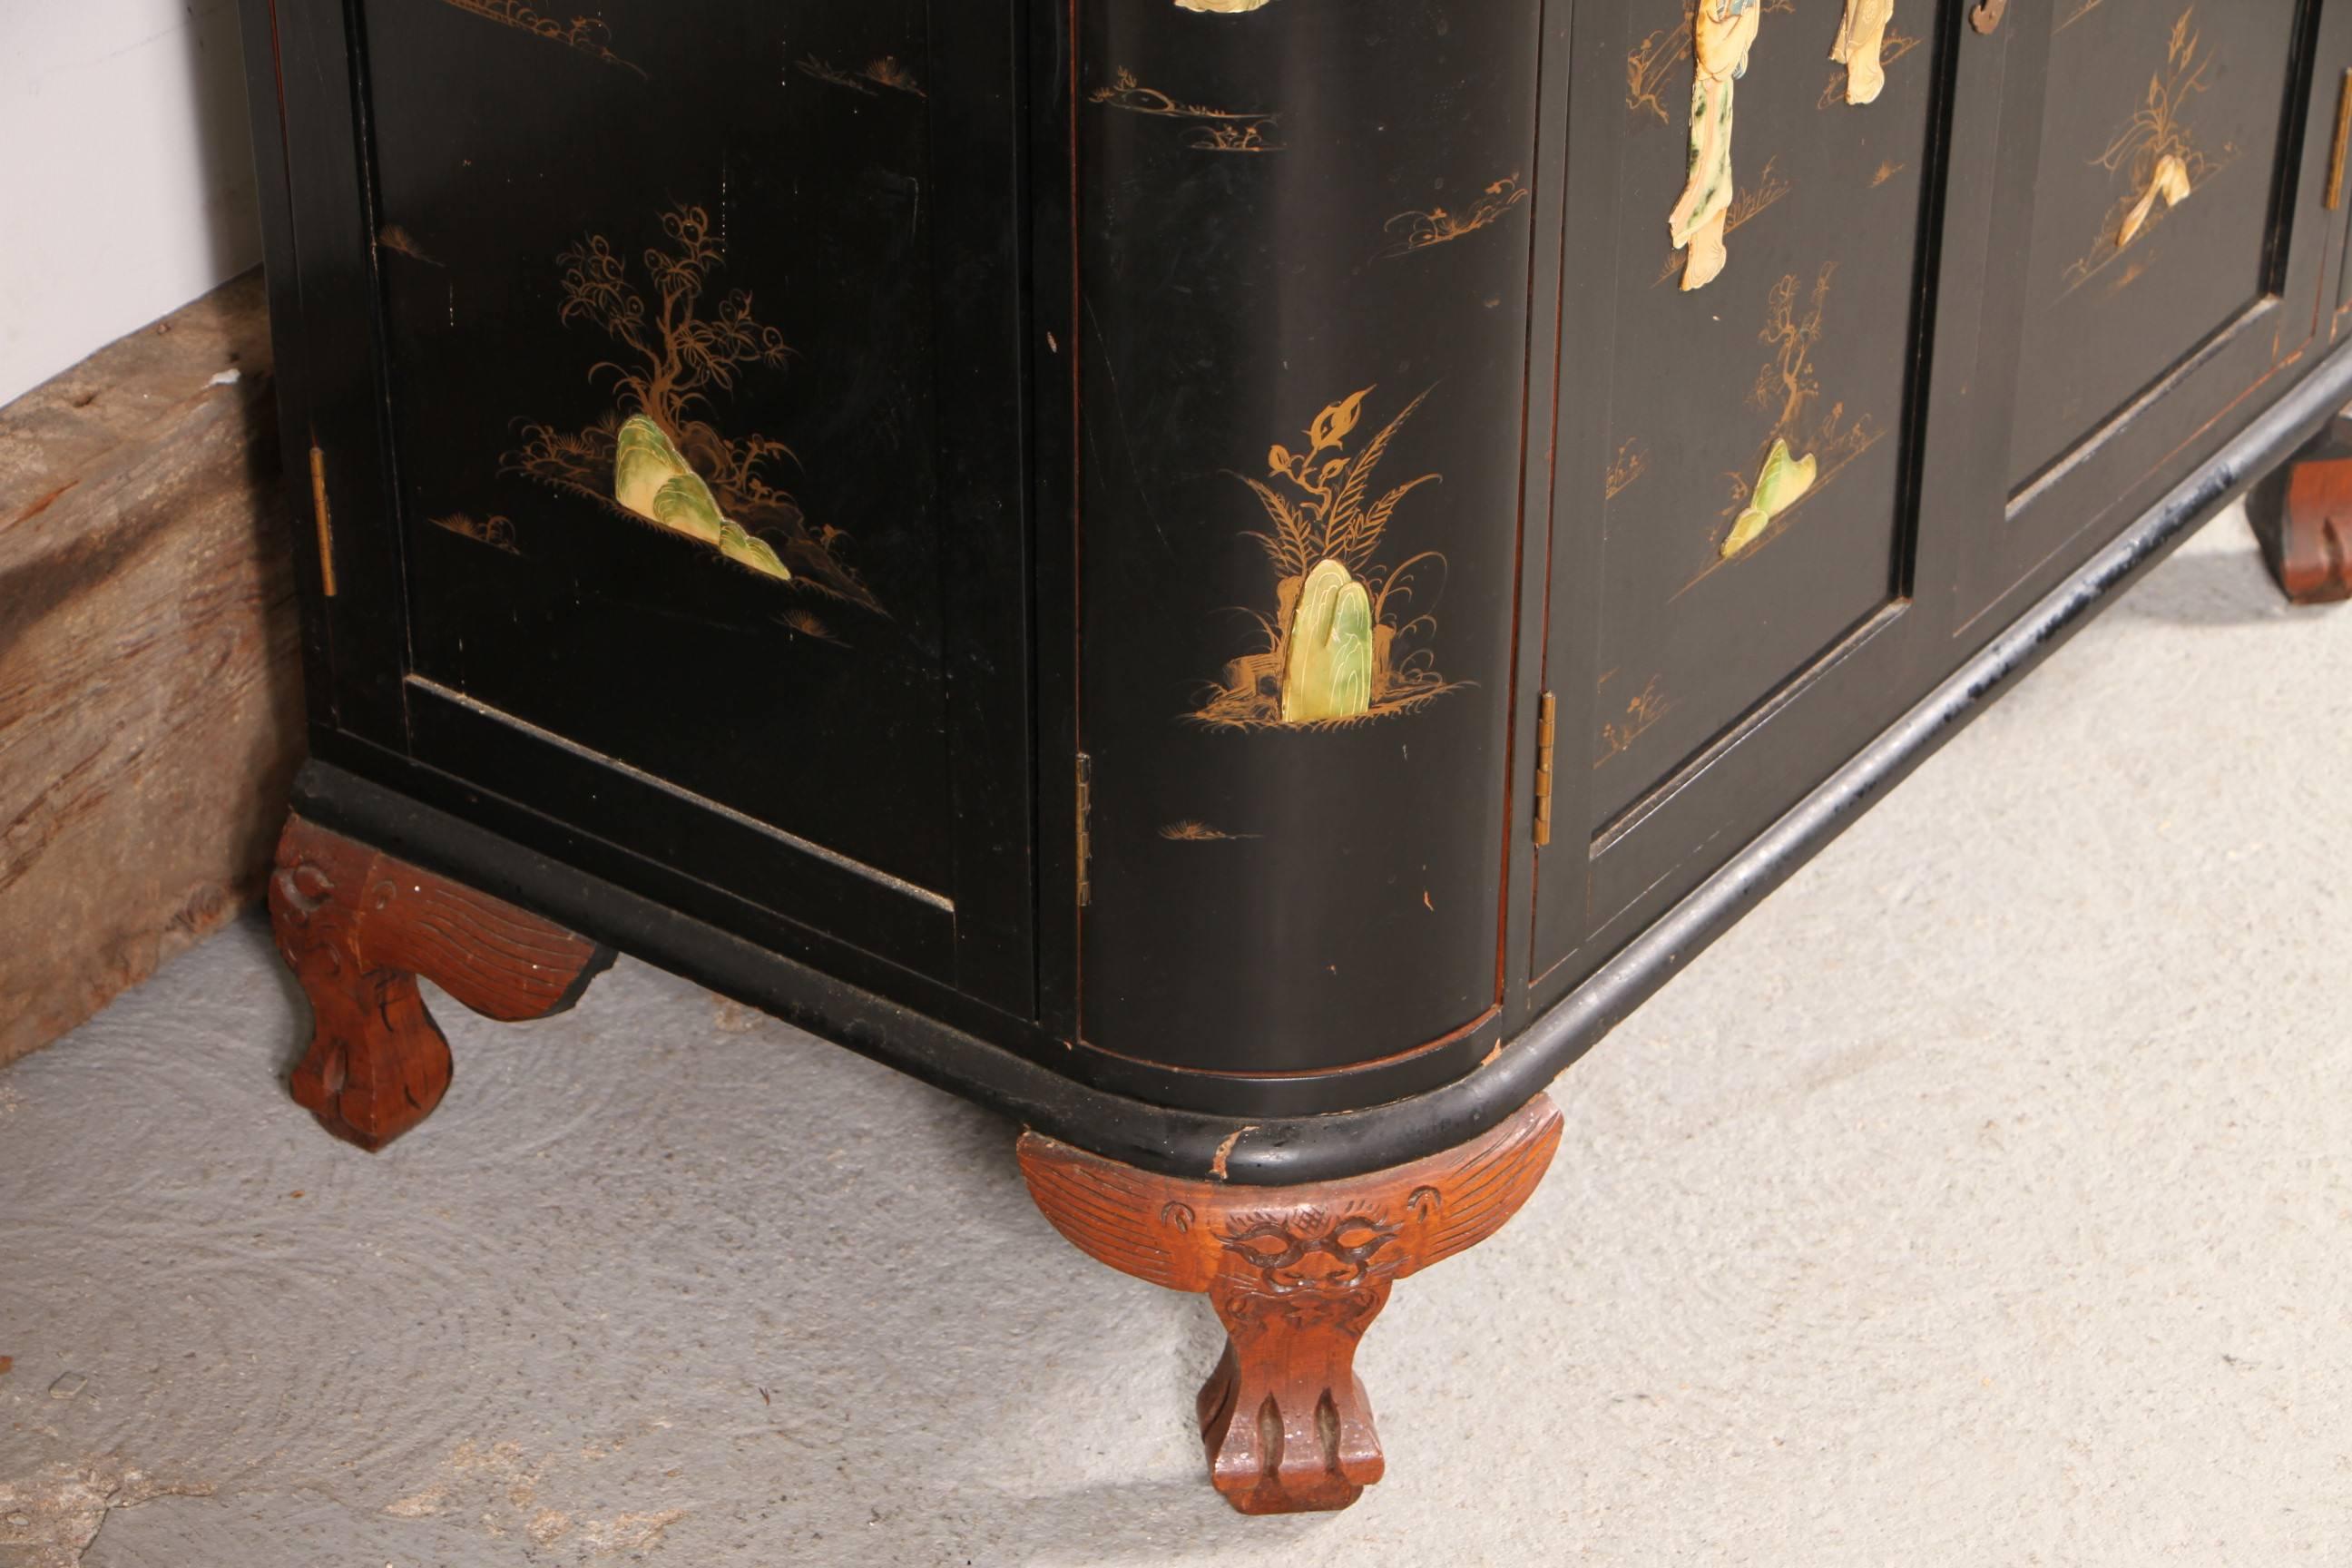 The ebonized chinoiserie cabinet, elaborately decorated with mother-of-pearl and polychrome stone inlaid figures, landscapes and gilt embellishments. With unusual rounded corners and the contrasting carved paw feet.
The top lifts up and the door